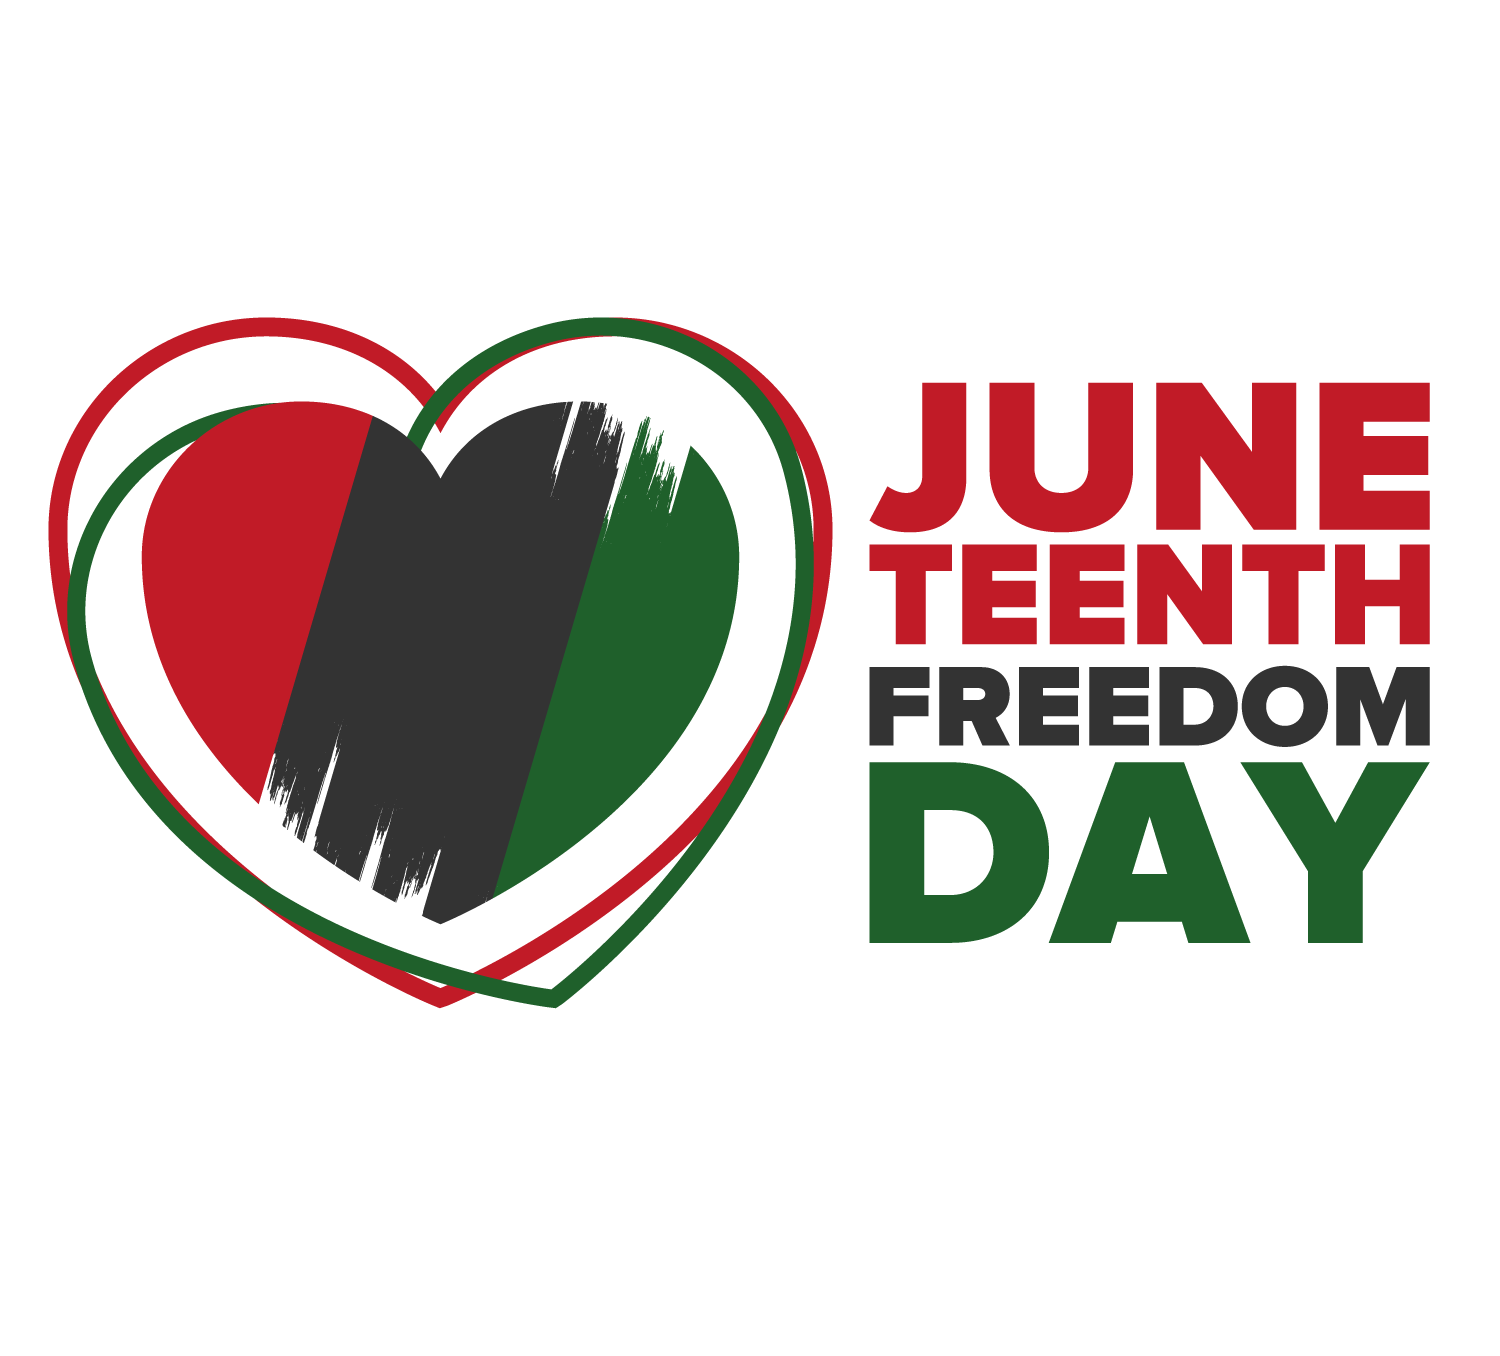 New Company Holiday - Juneteenth